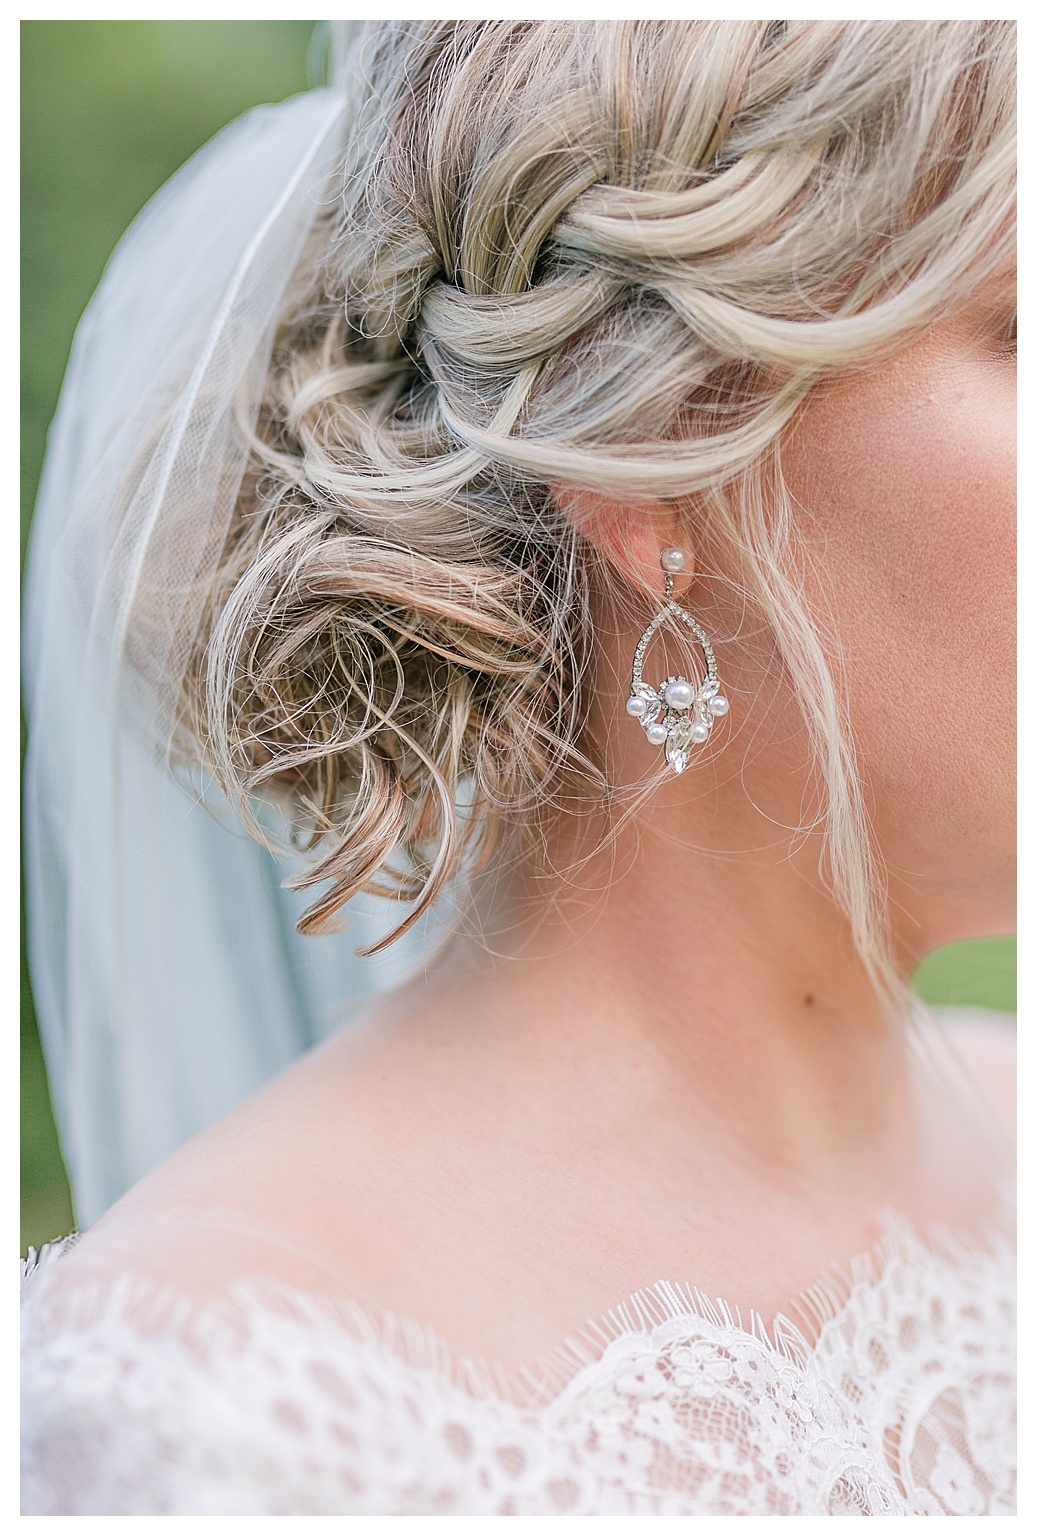 closeup of bride's earrings and curled hair